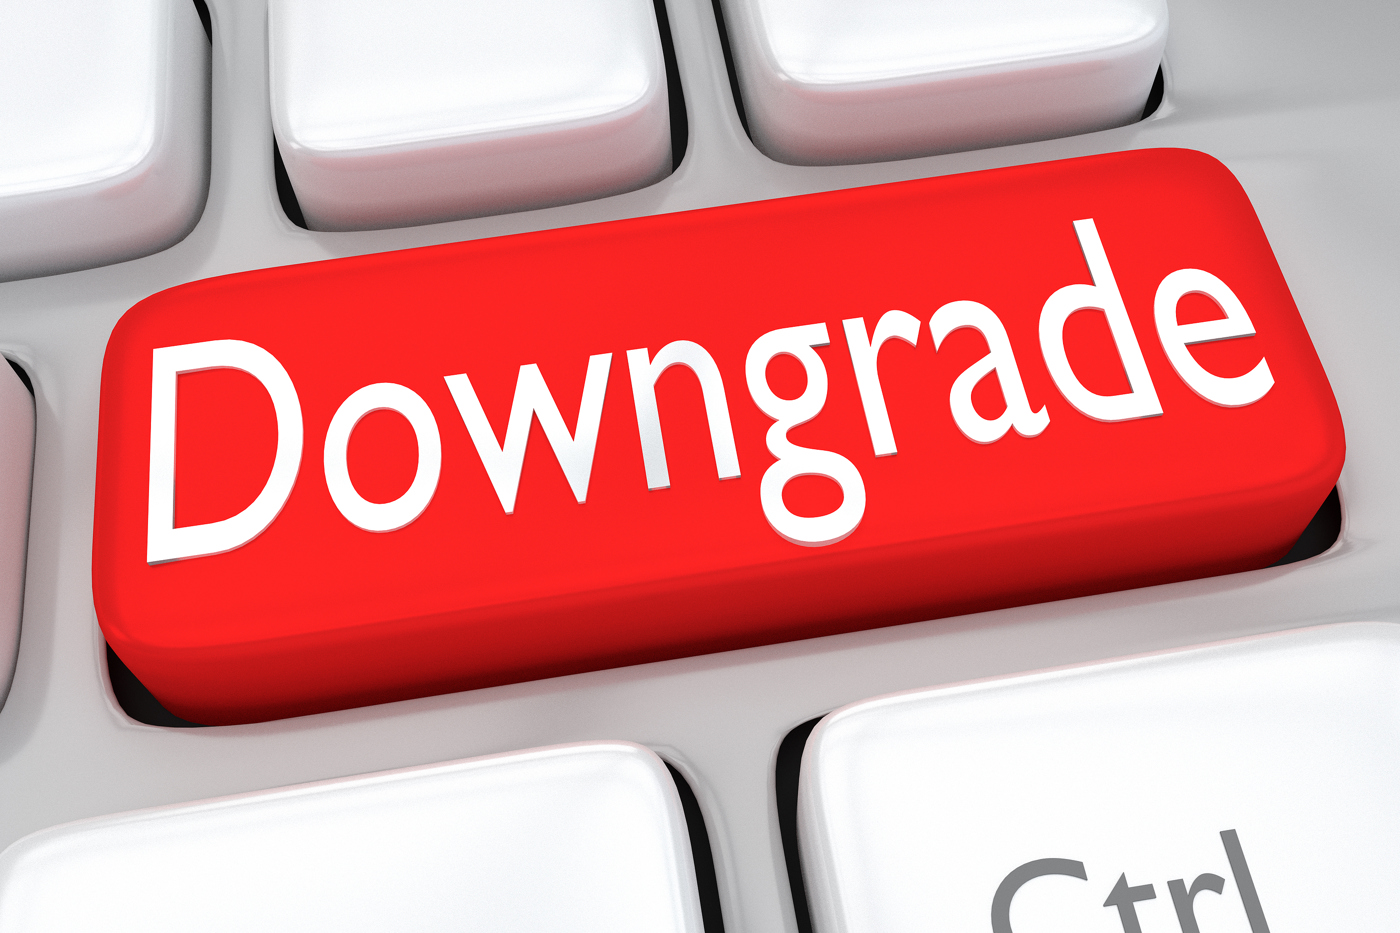 Analyst downgrade, Stock downgrade, Stock rating, Analyst news, Sell rating